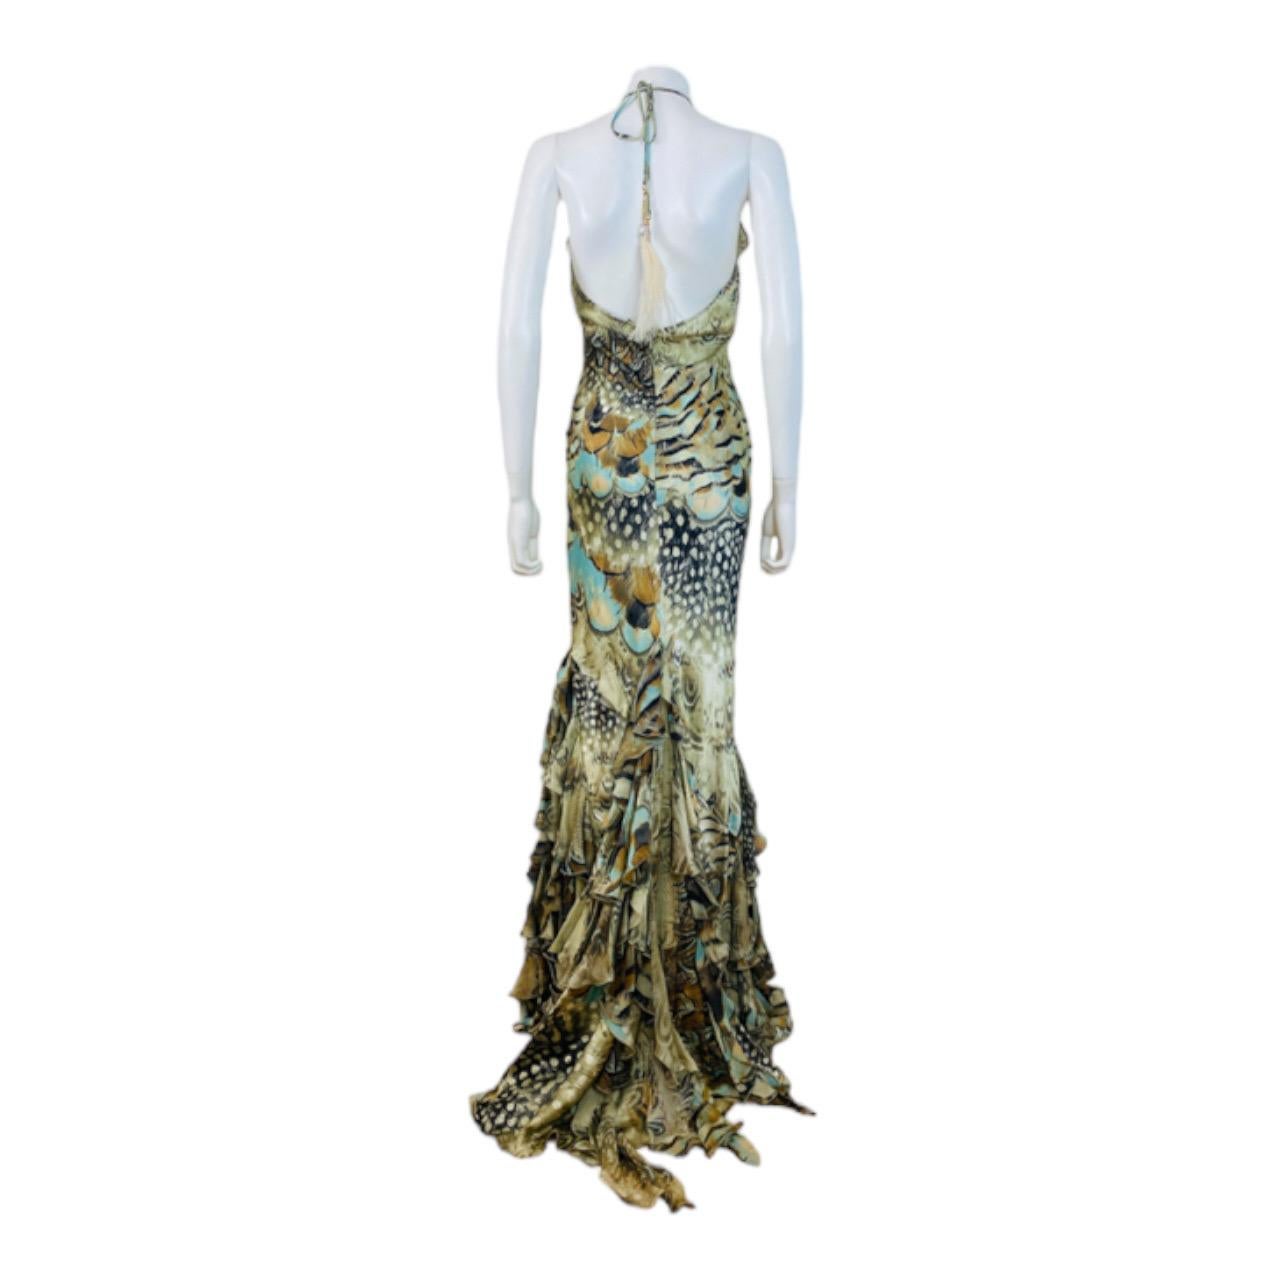 Vintage S/S 2004 Y2K Roberto Cavalli Silk Feather Print Halter Dress Gown Ruffle For Sale 2